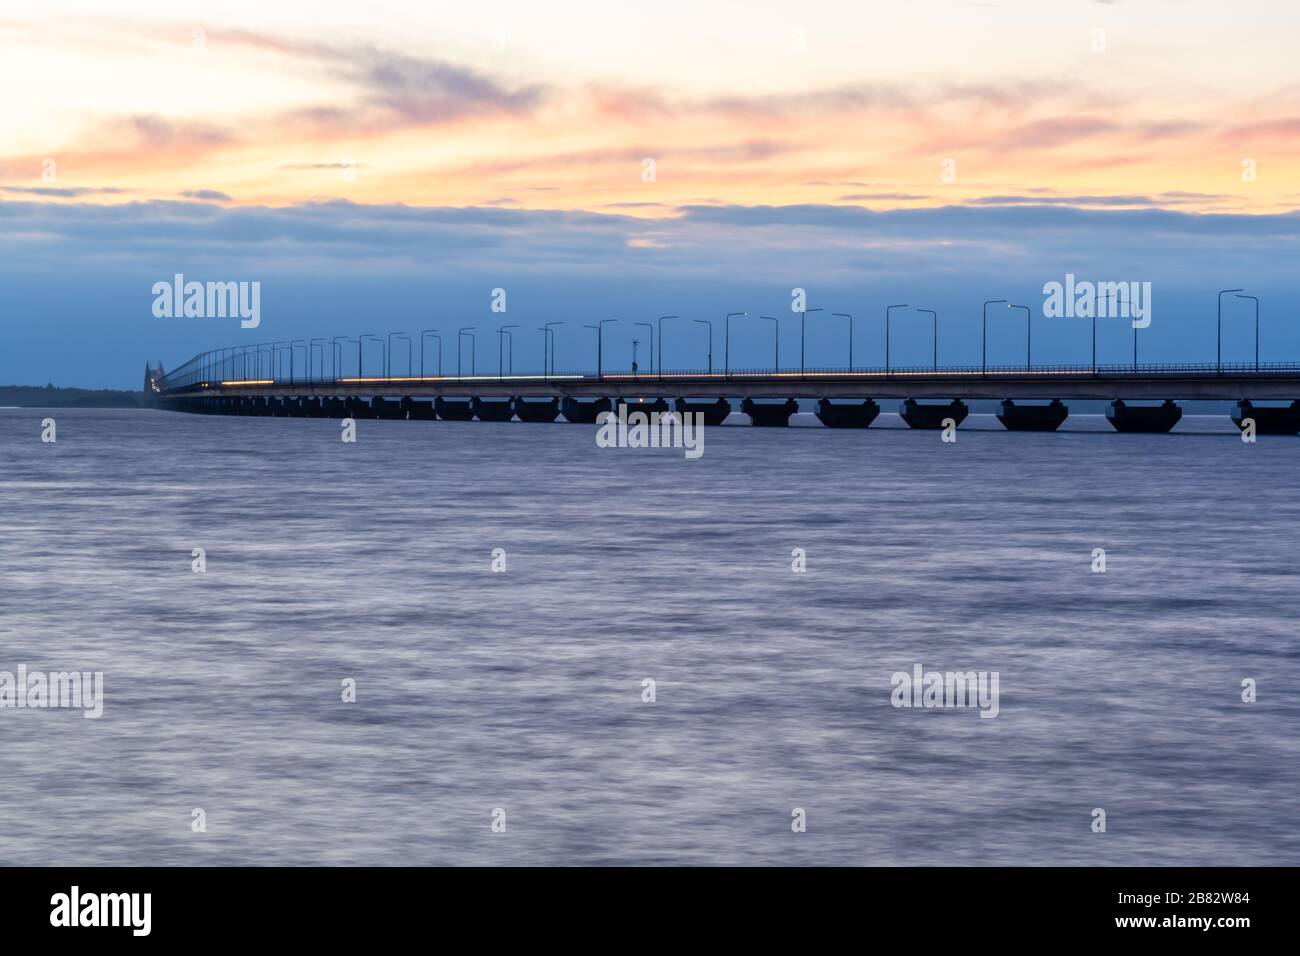 The Oland Bridge by twilight time, the bridge is connecting the island Oland with mainland Sweden Stock Photo